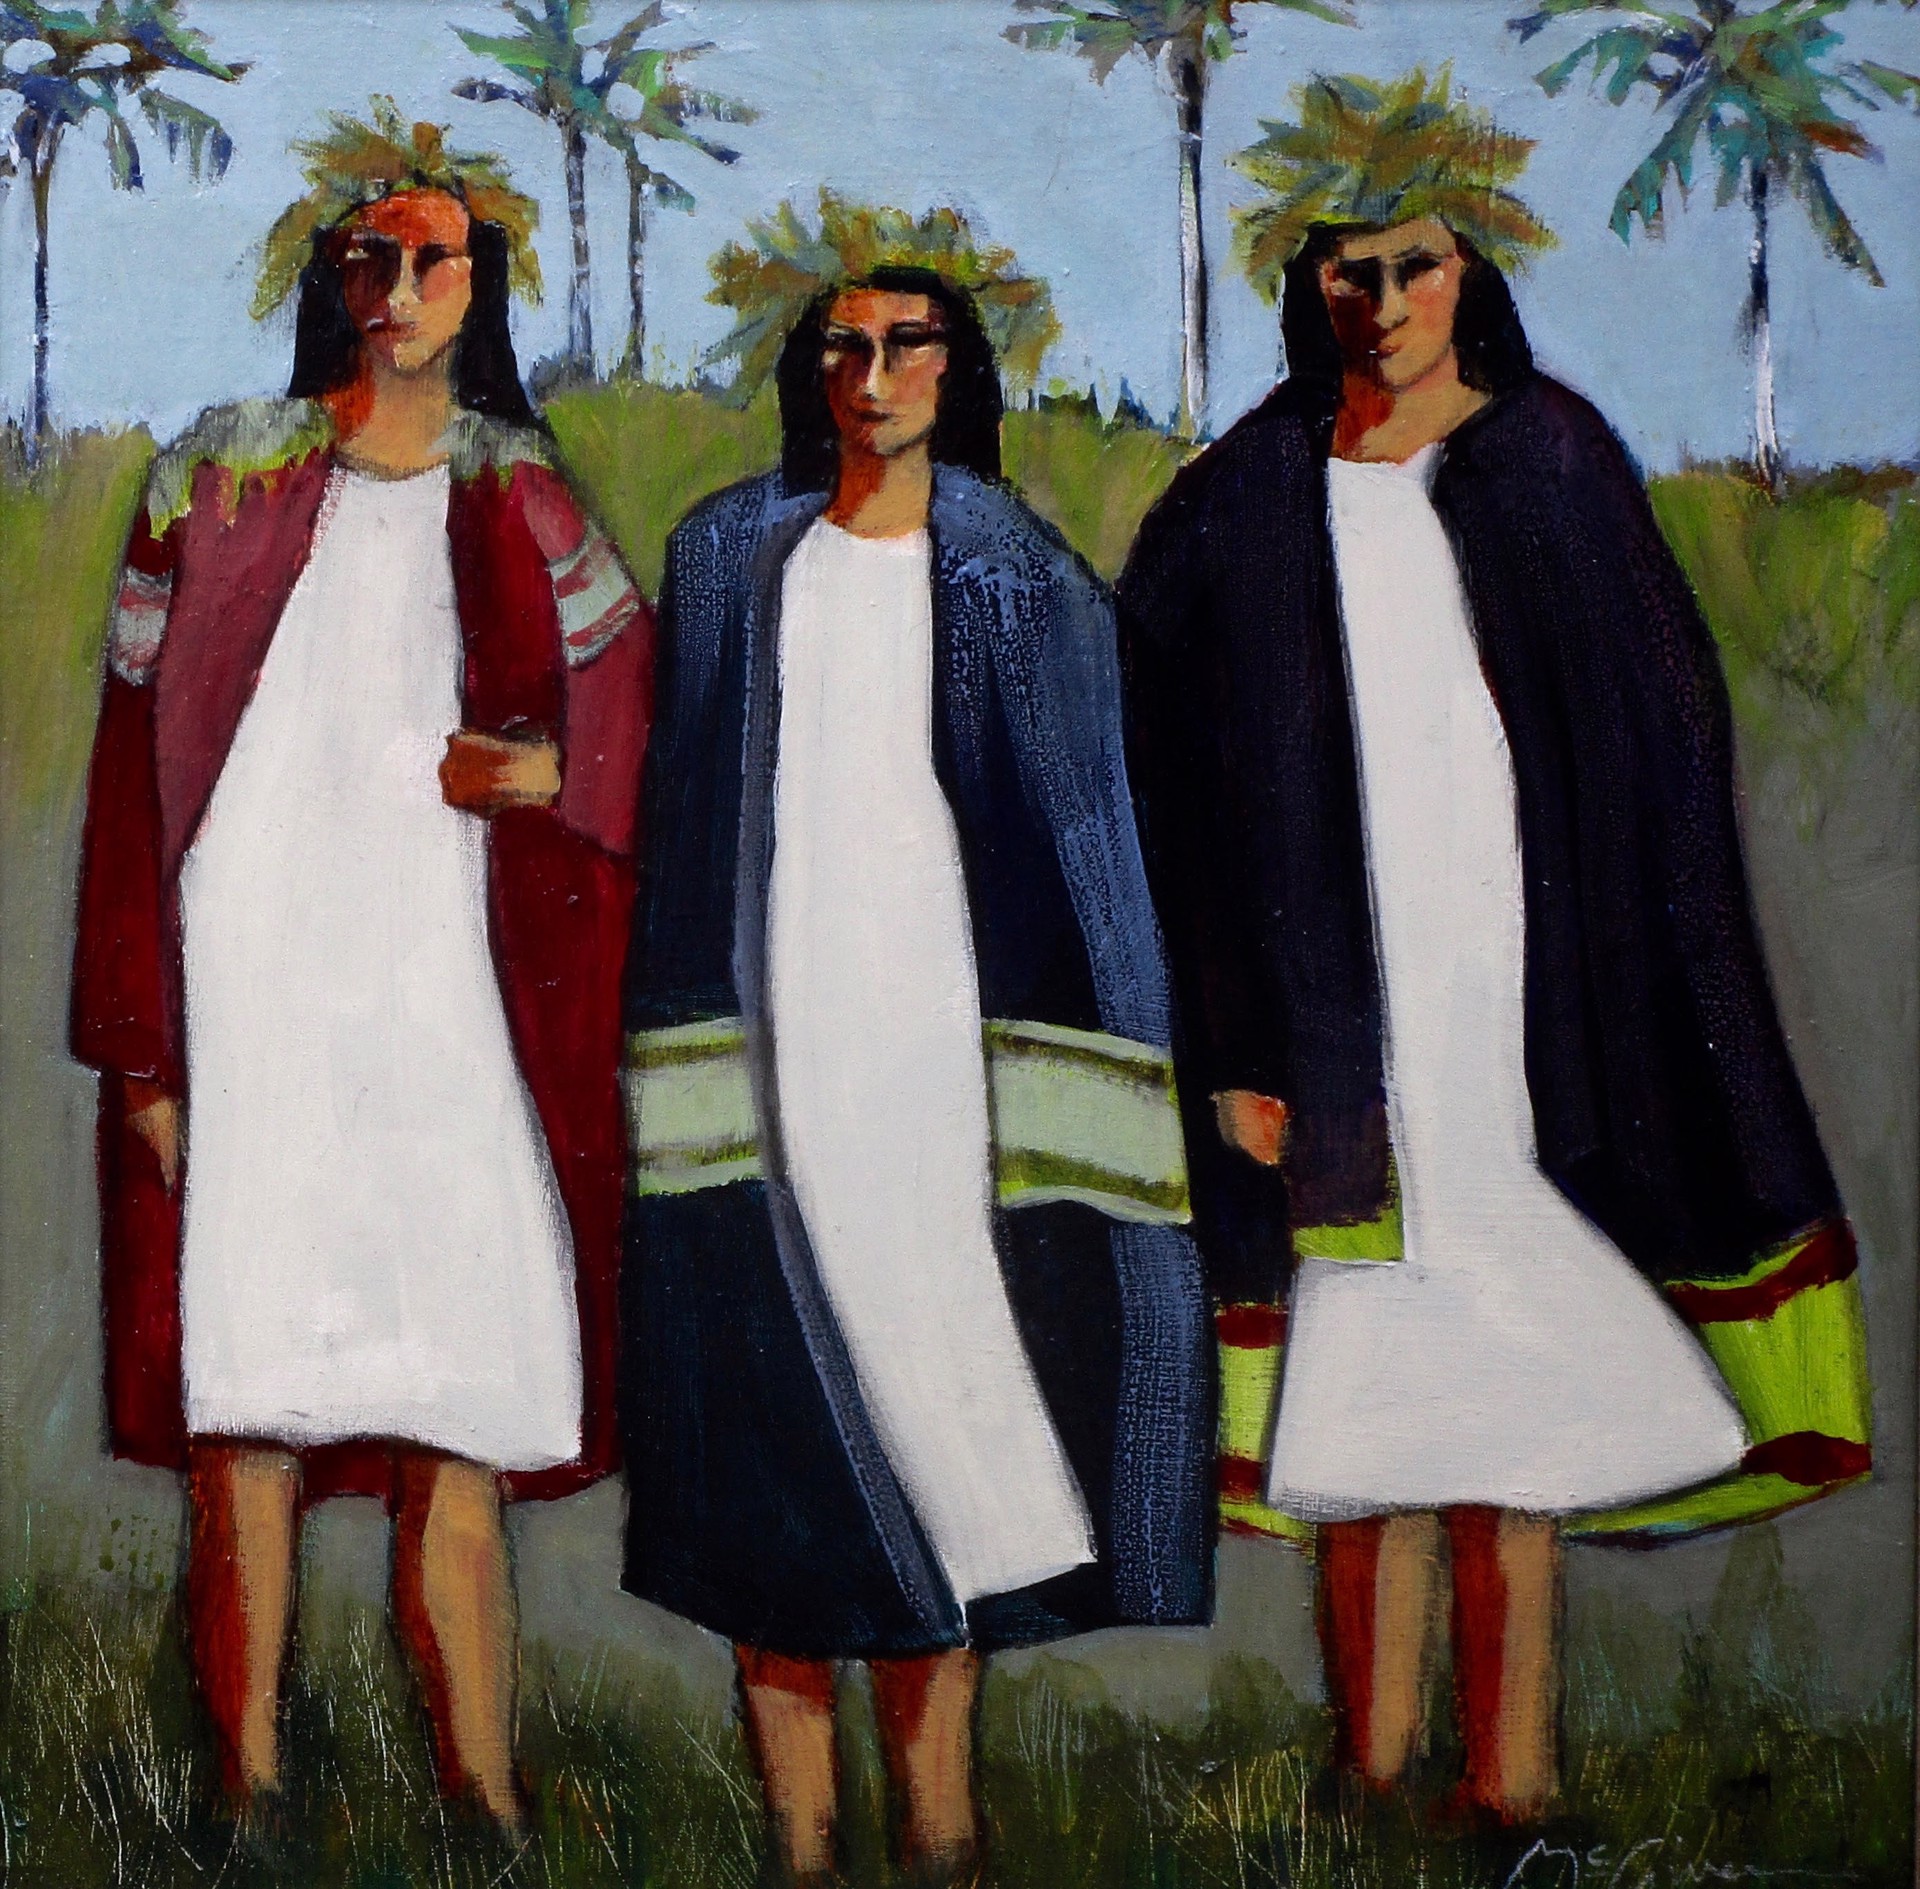 Village Ceremony by Peggy McGivern